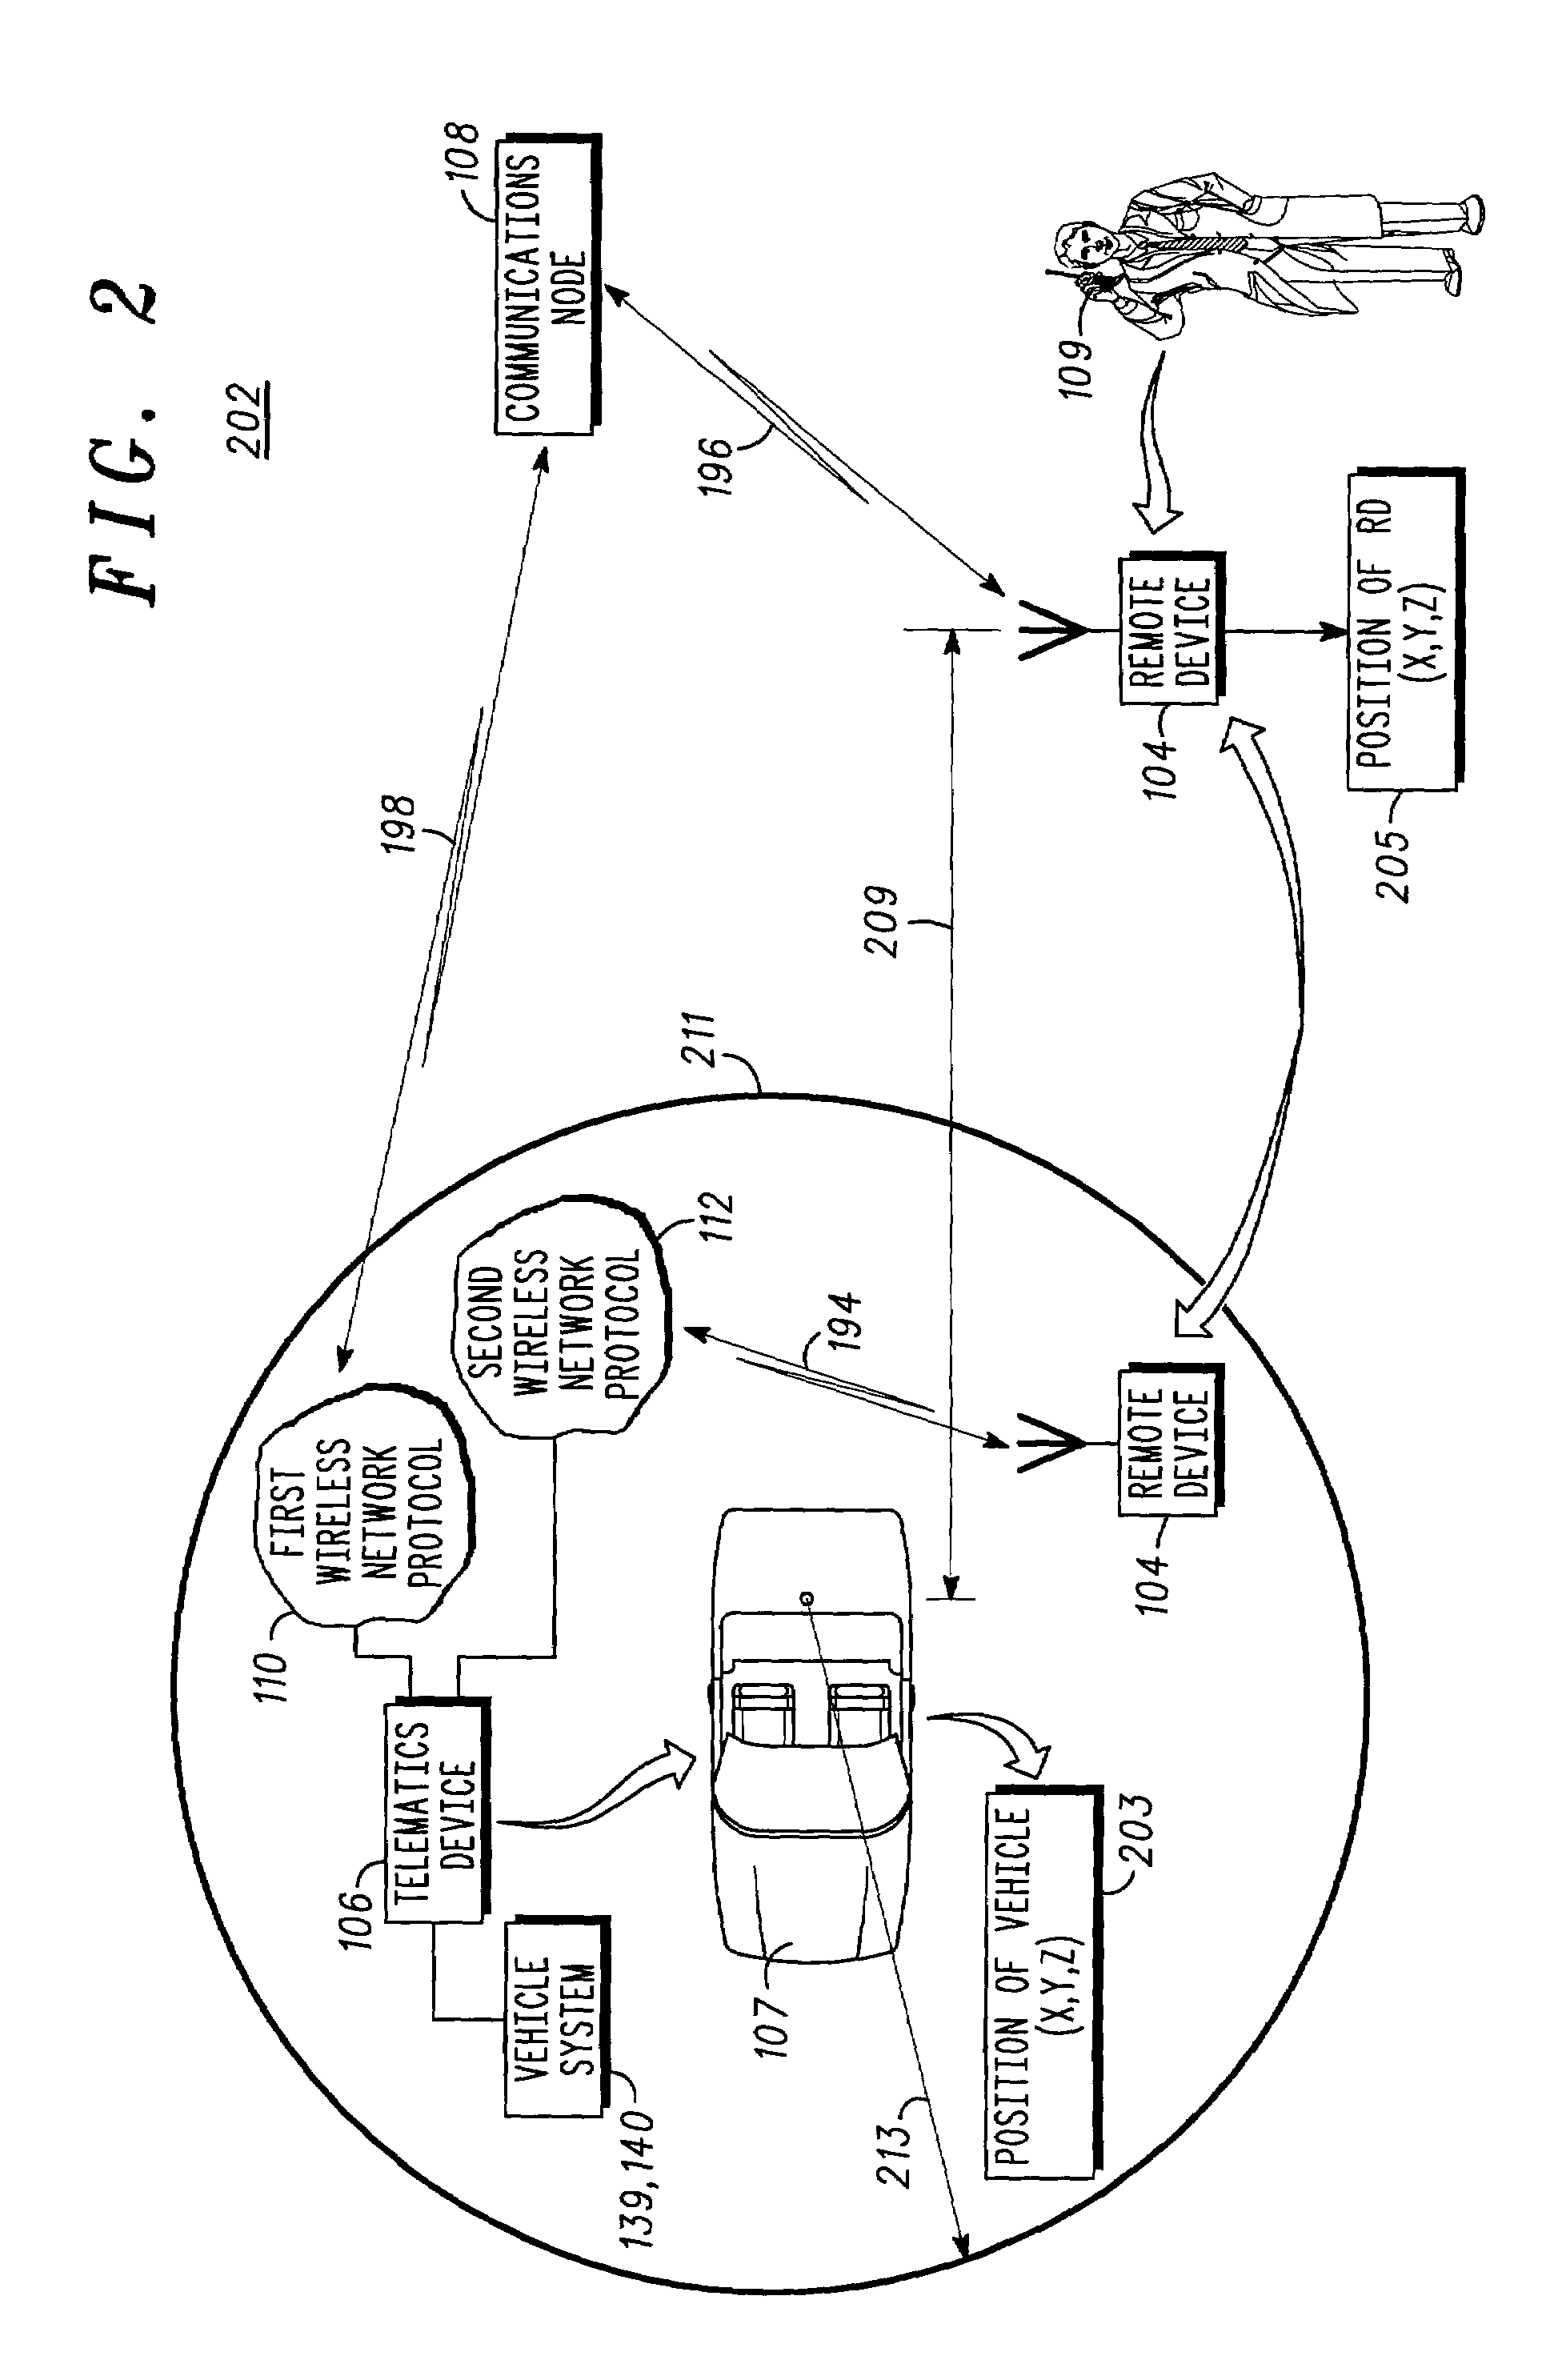 Integrated personal communications system and method